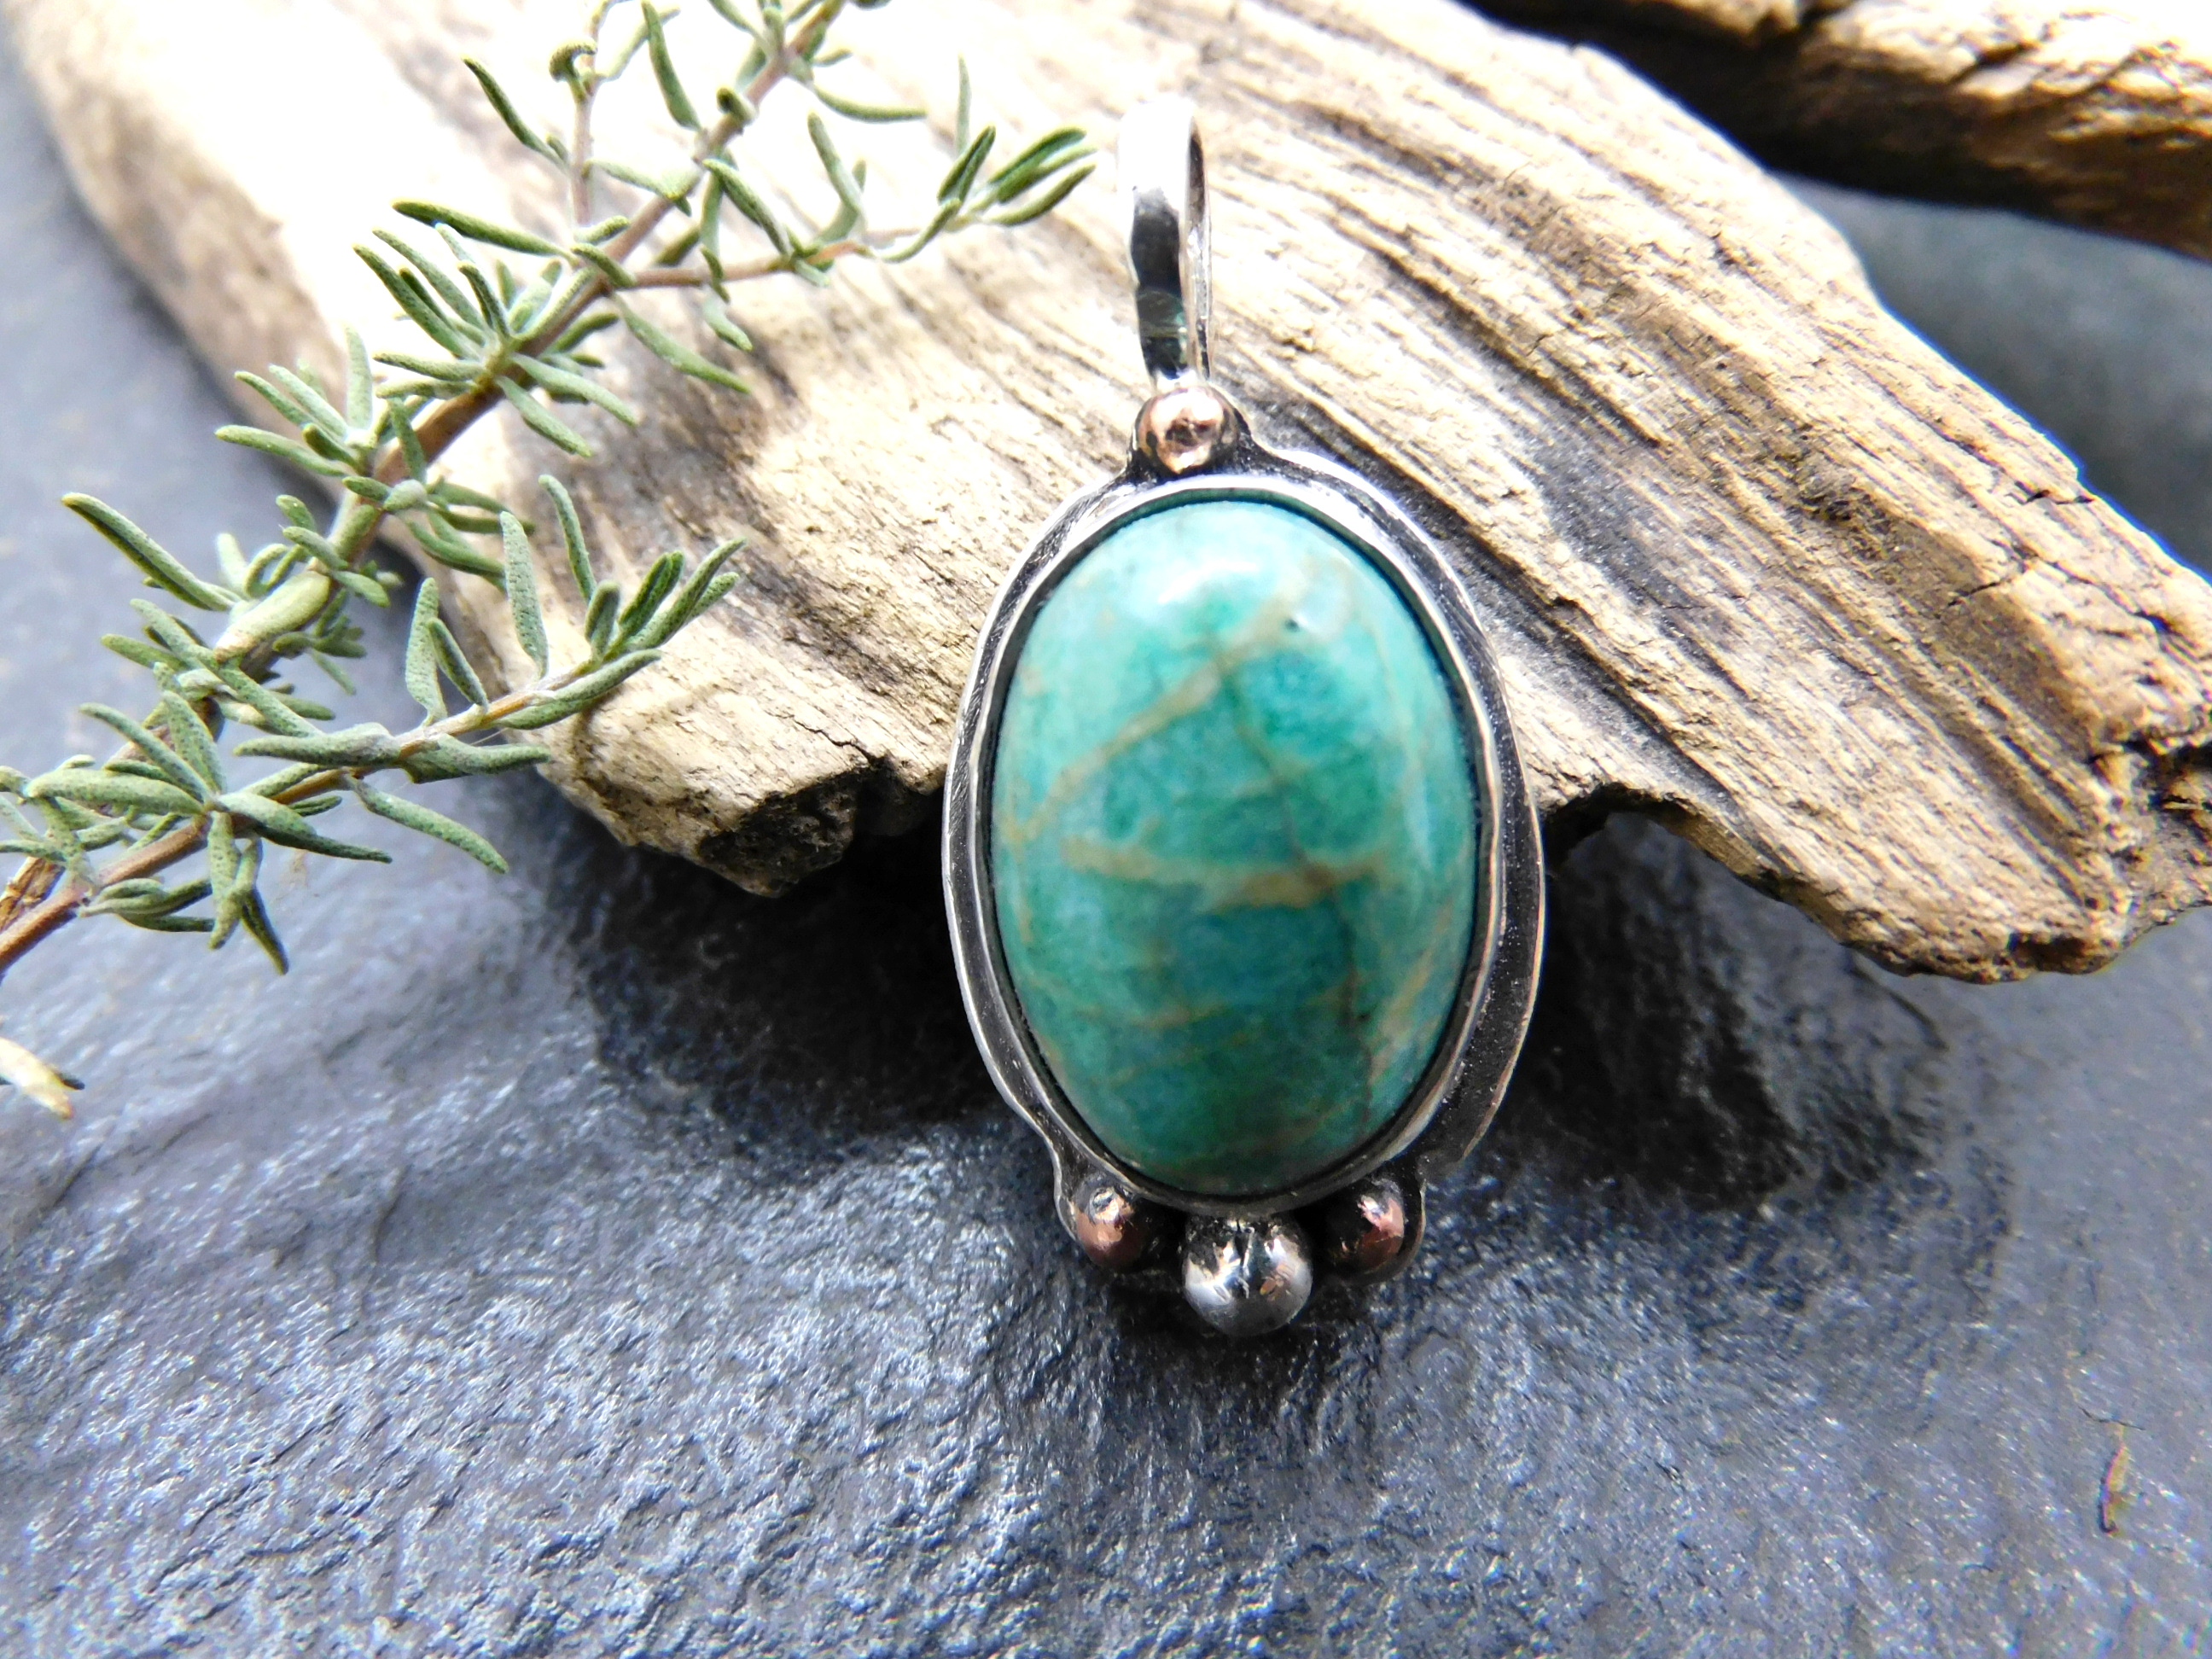 Pendant with amazonite stone set in sterling silver and copper